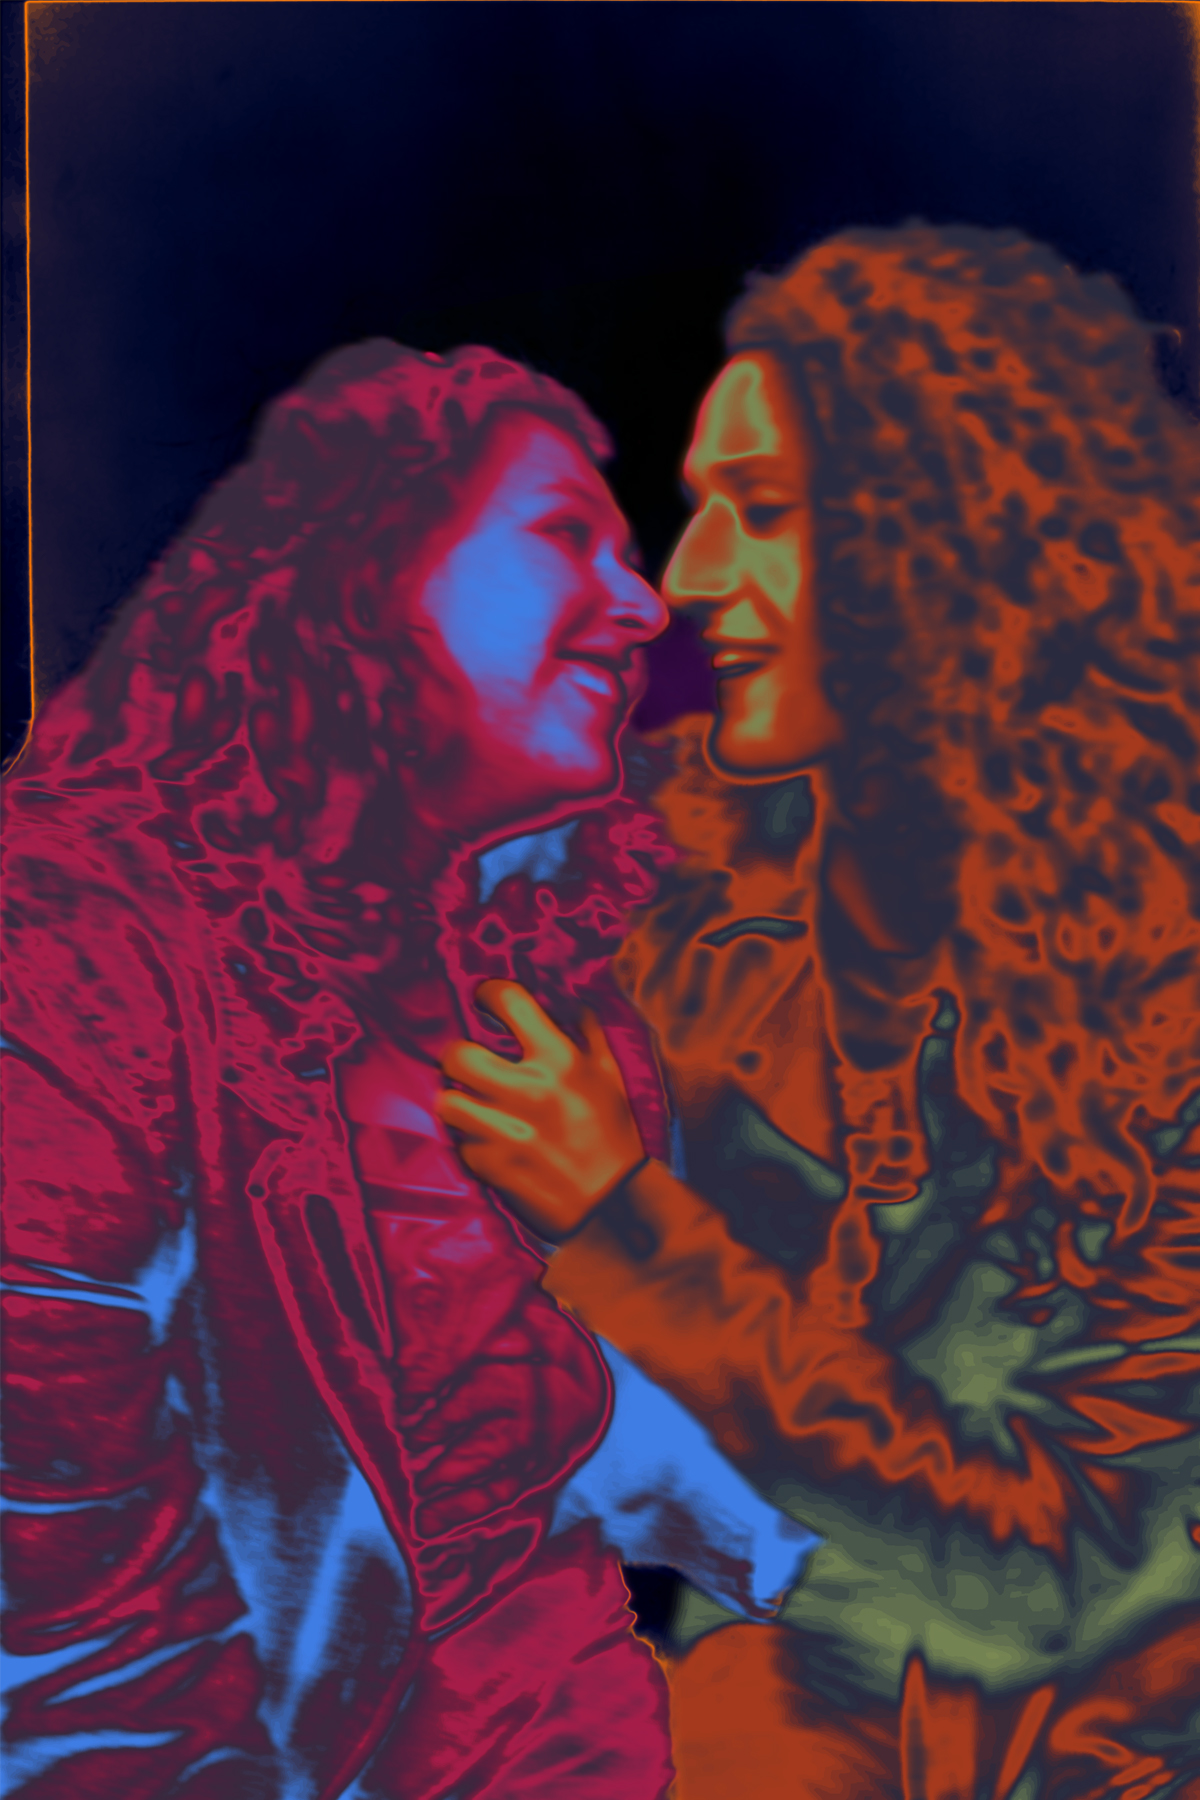 A photograph of a couple smiling and embracing before a kiss, edited so that one figure is entirely blue, pink and purple, and the other is yellow, orange, green and purple, on a dark blue background.